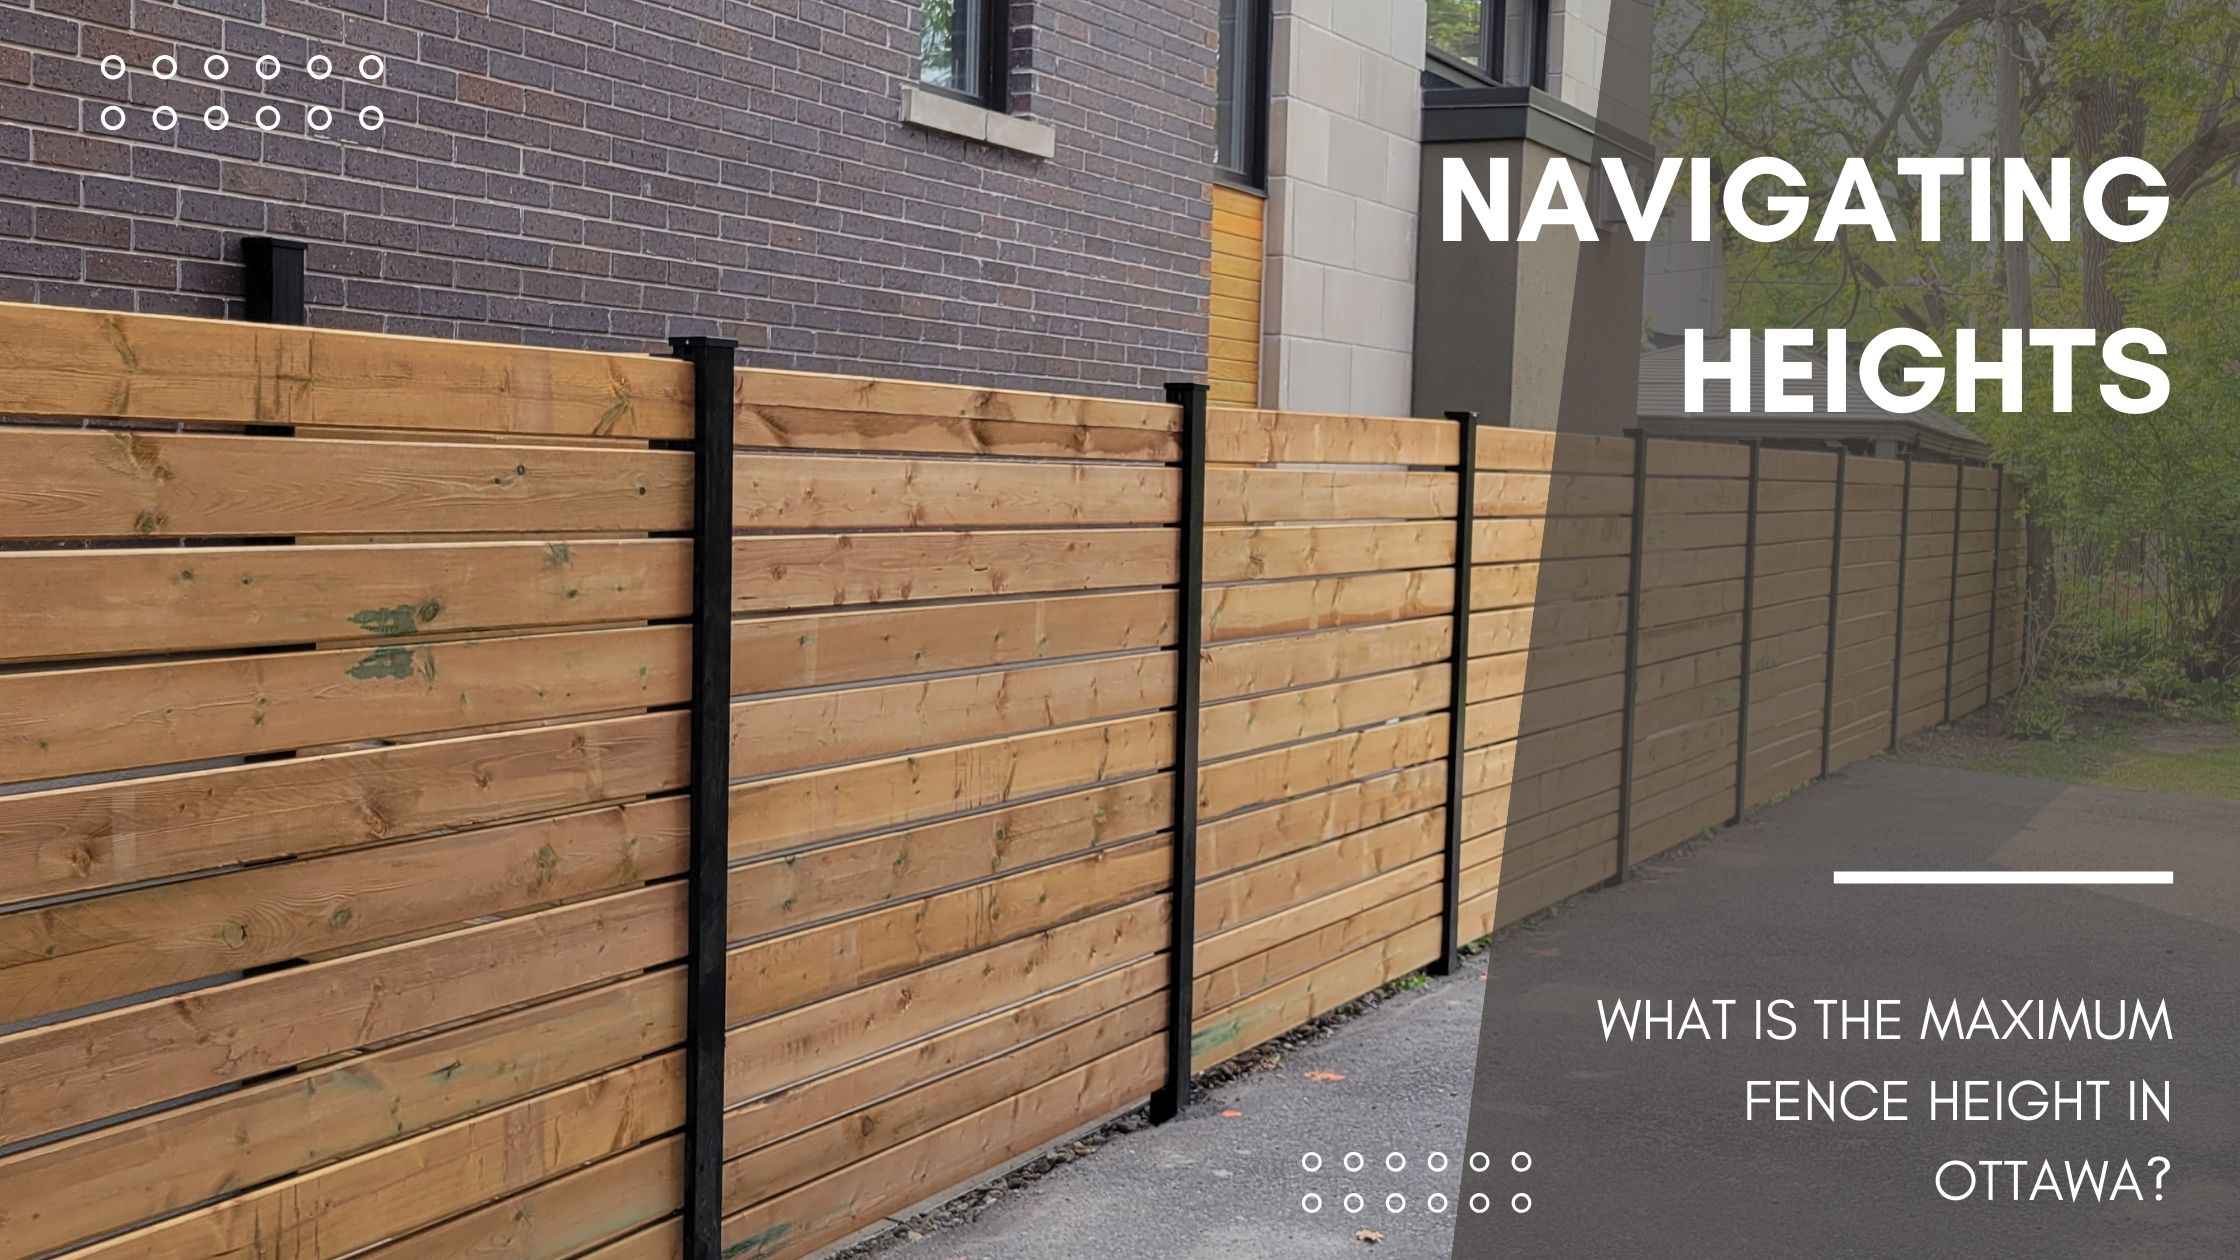 What is the maximum fence height in Ottawa?